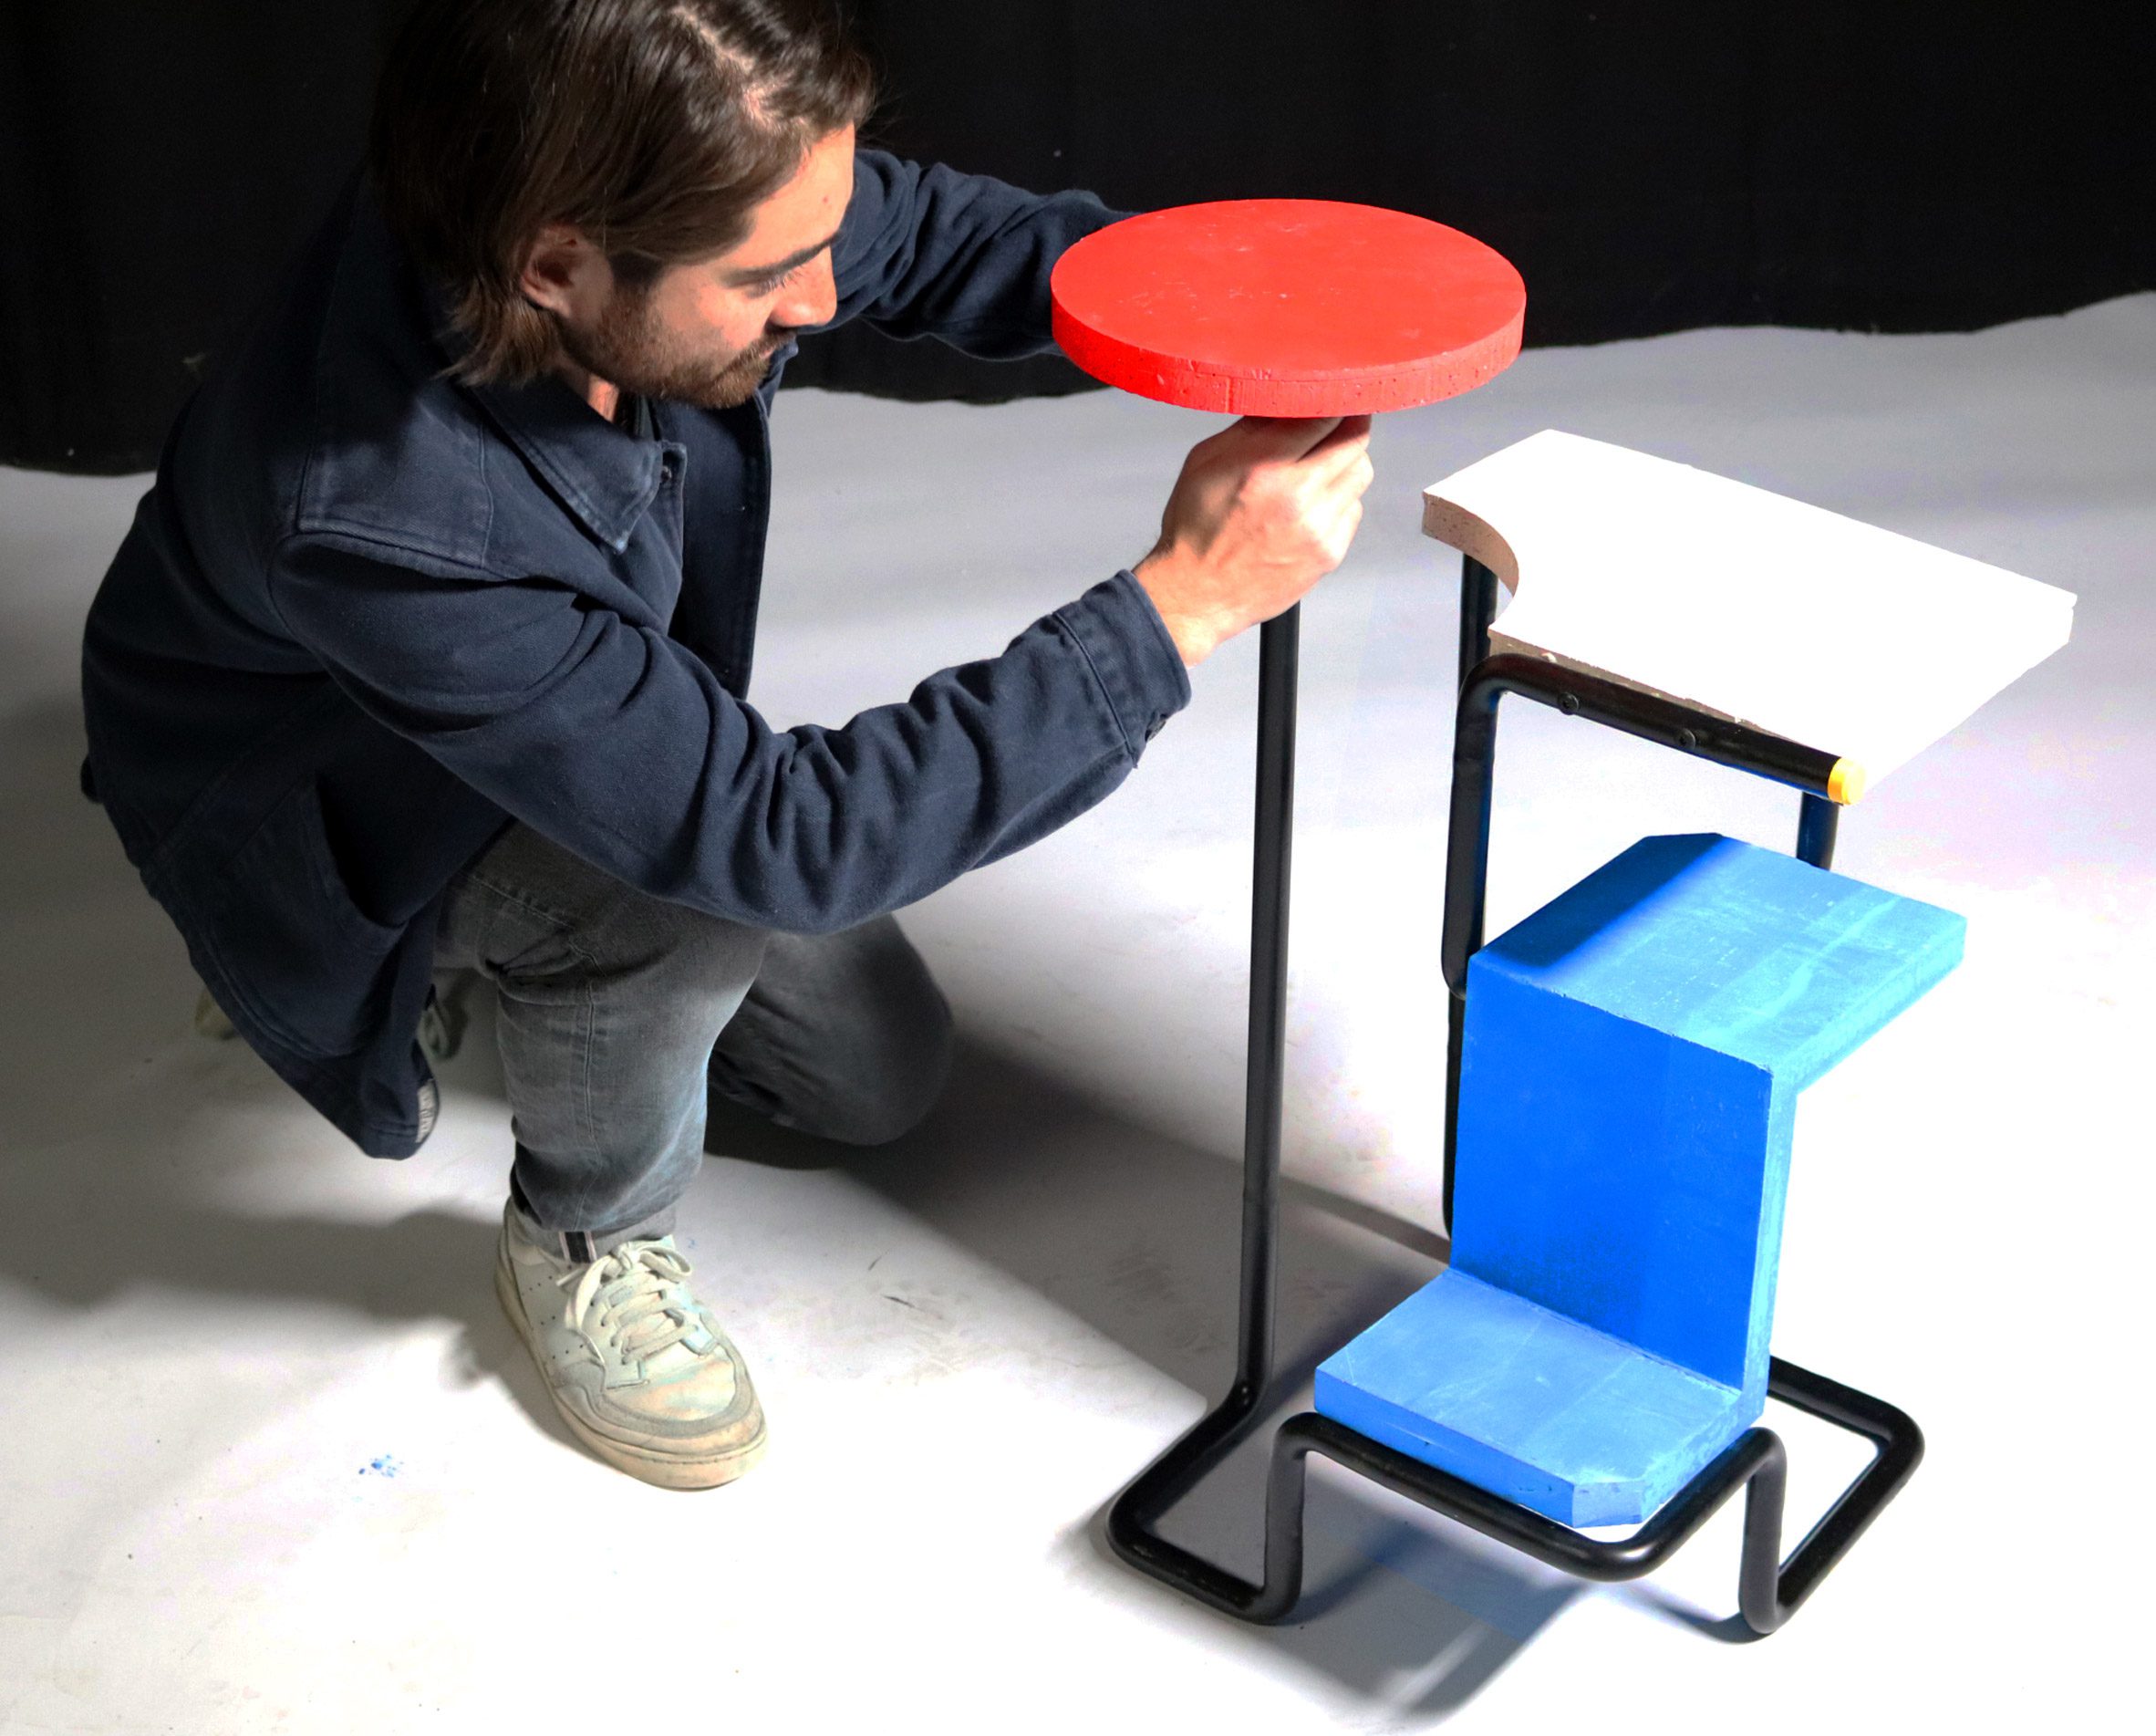 Person handling a side table with red, white and blue tabletops and a metal structure made from stool legs.